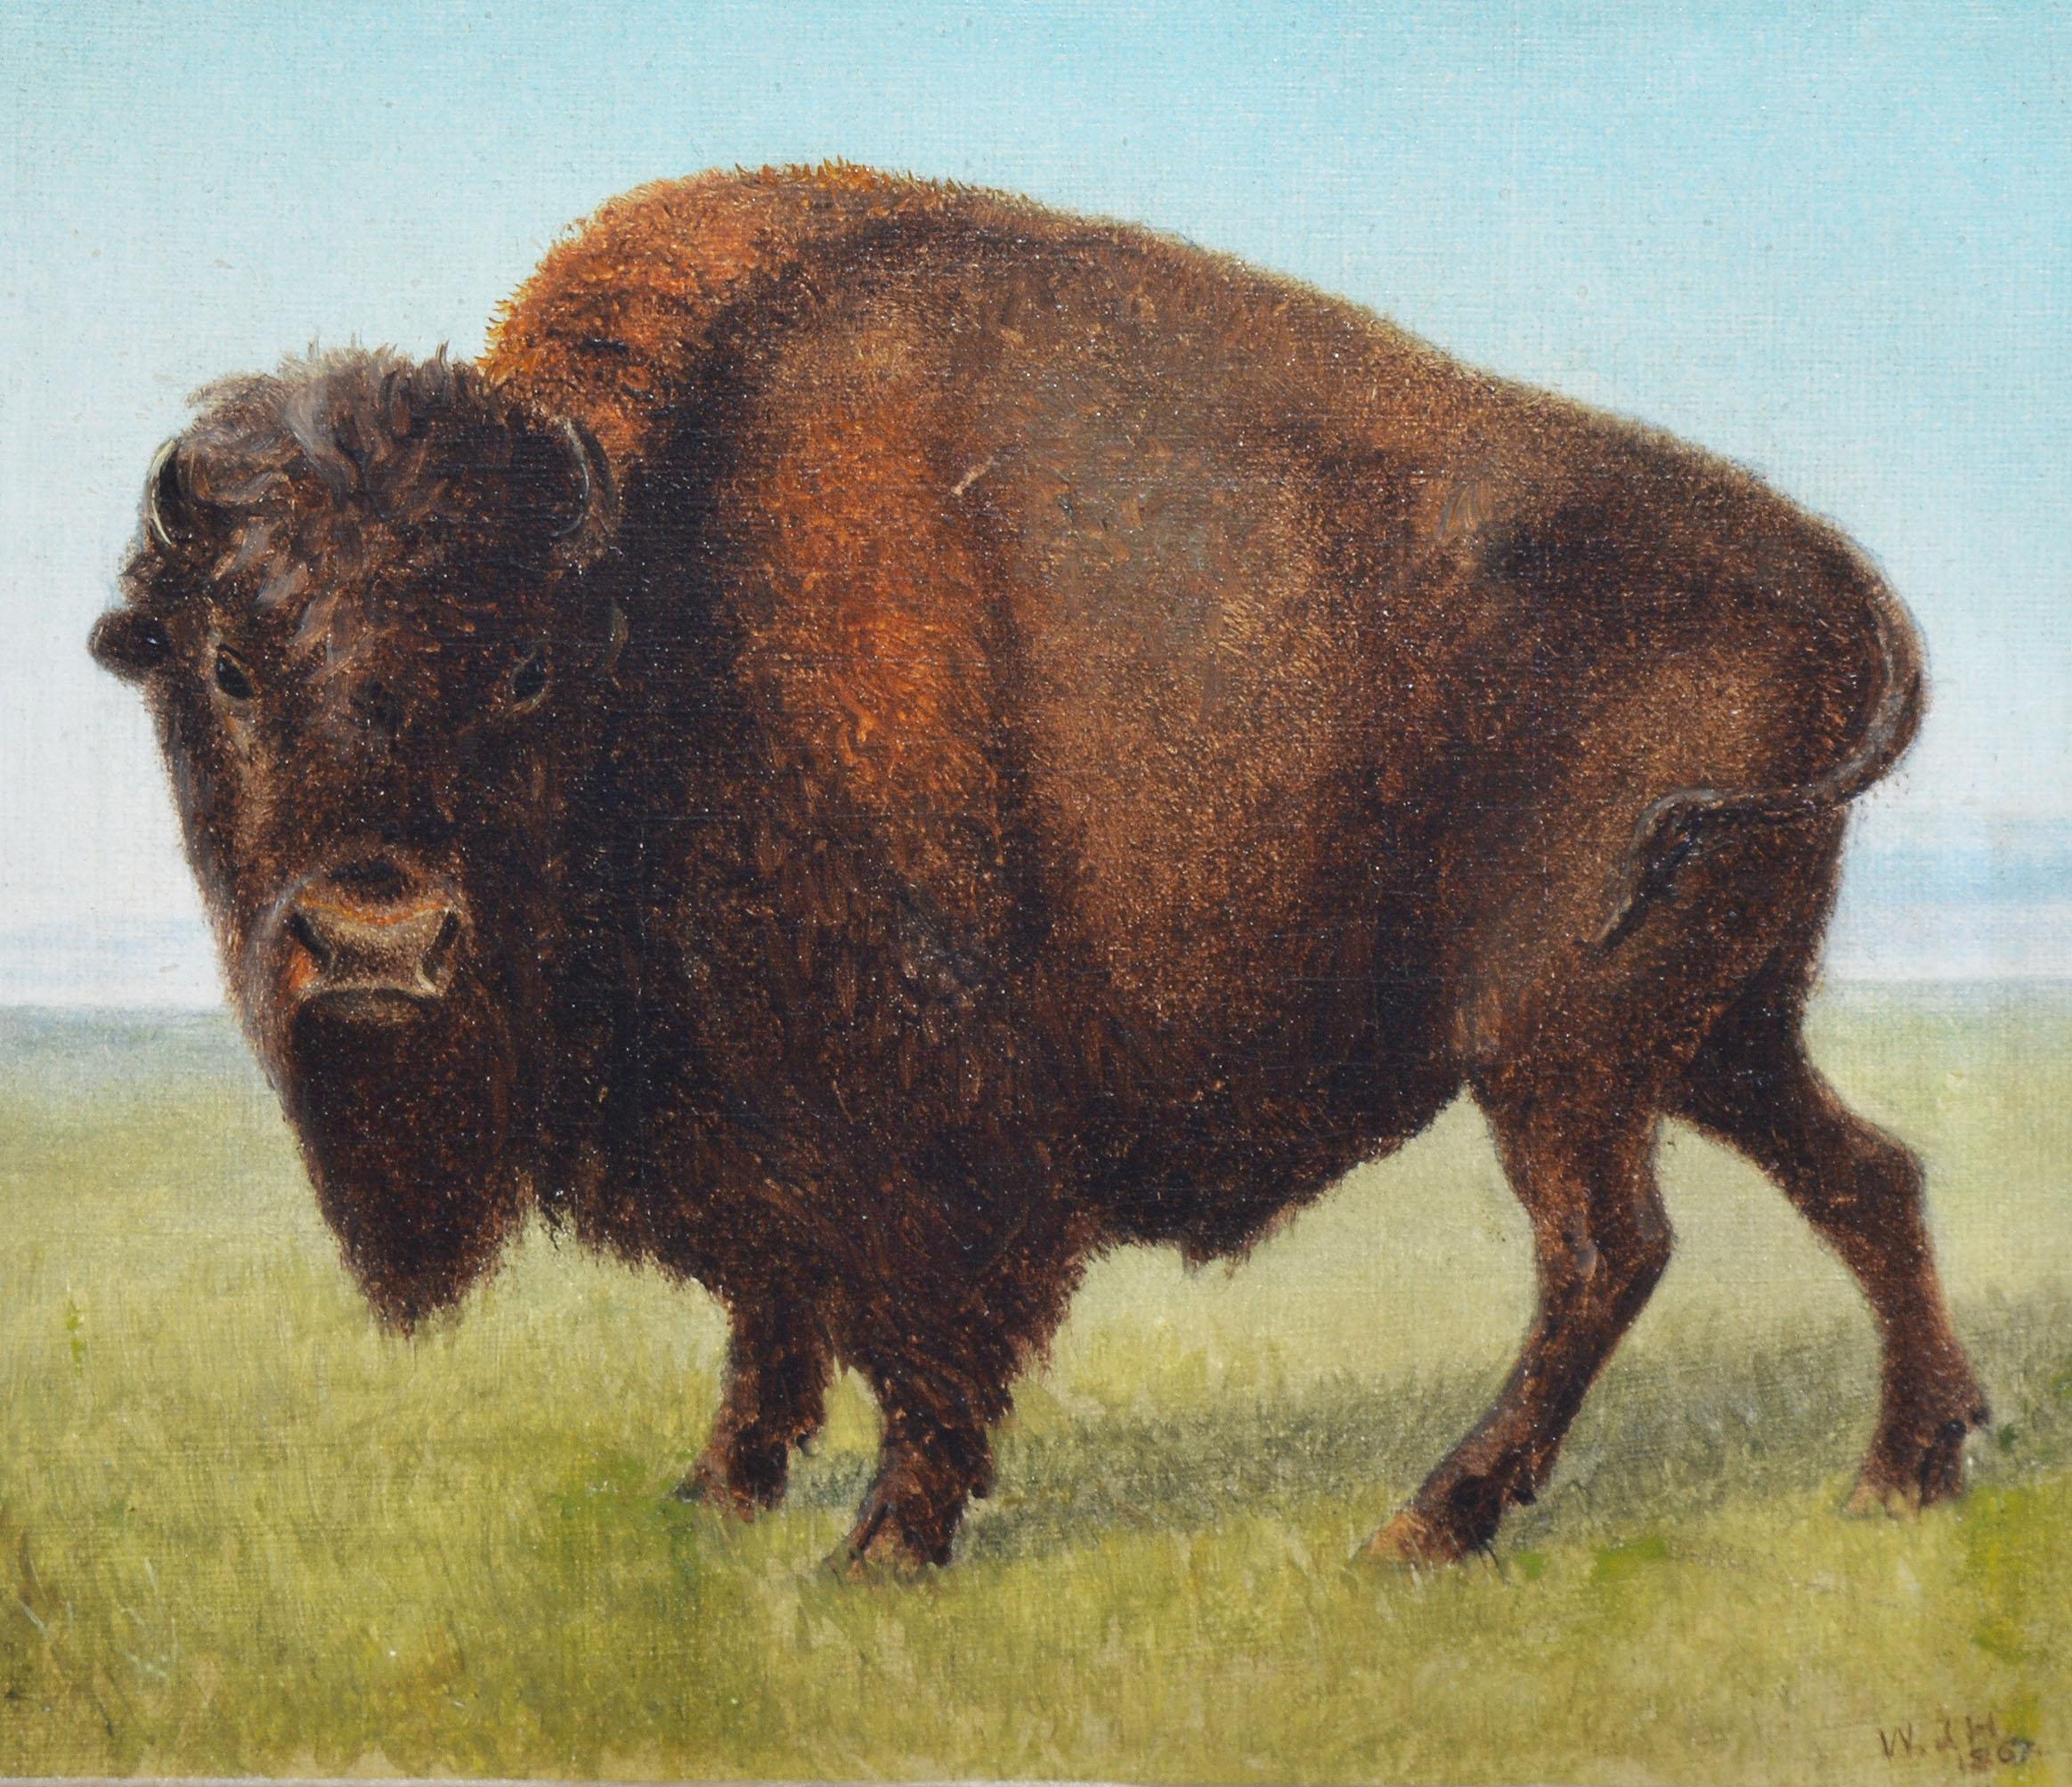 Antique western painting of a Buffalo by William Hays Sr  (1830 - 1875).  Oil on board, circa 1870.  Signed in monogram.  Displayed in a giltwood frame.  Image, 7.5